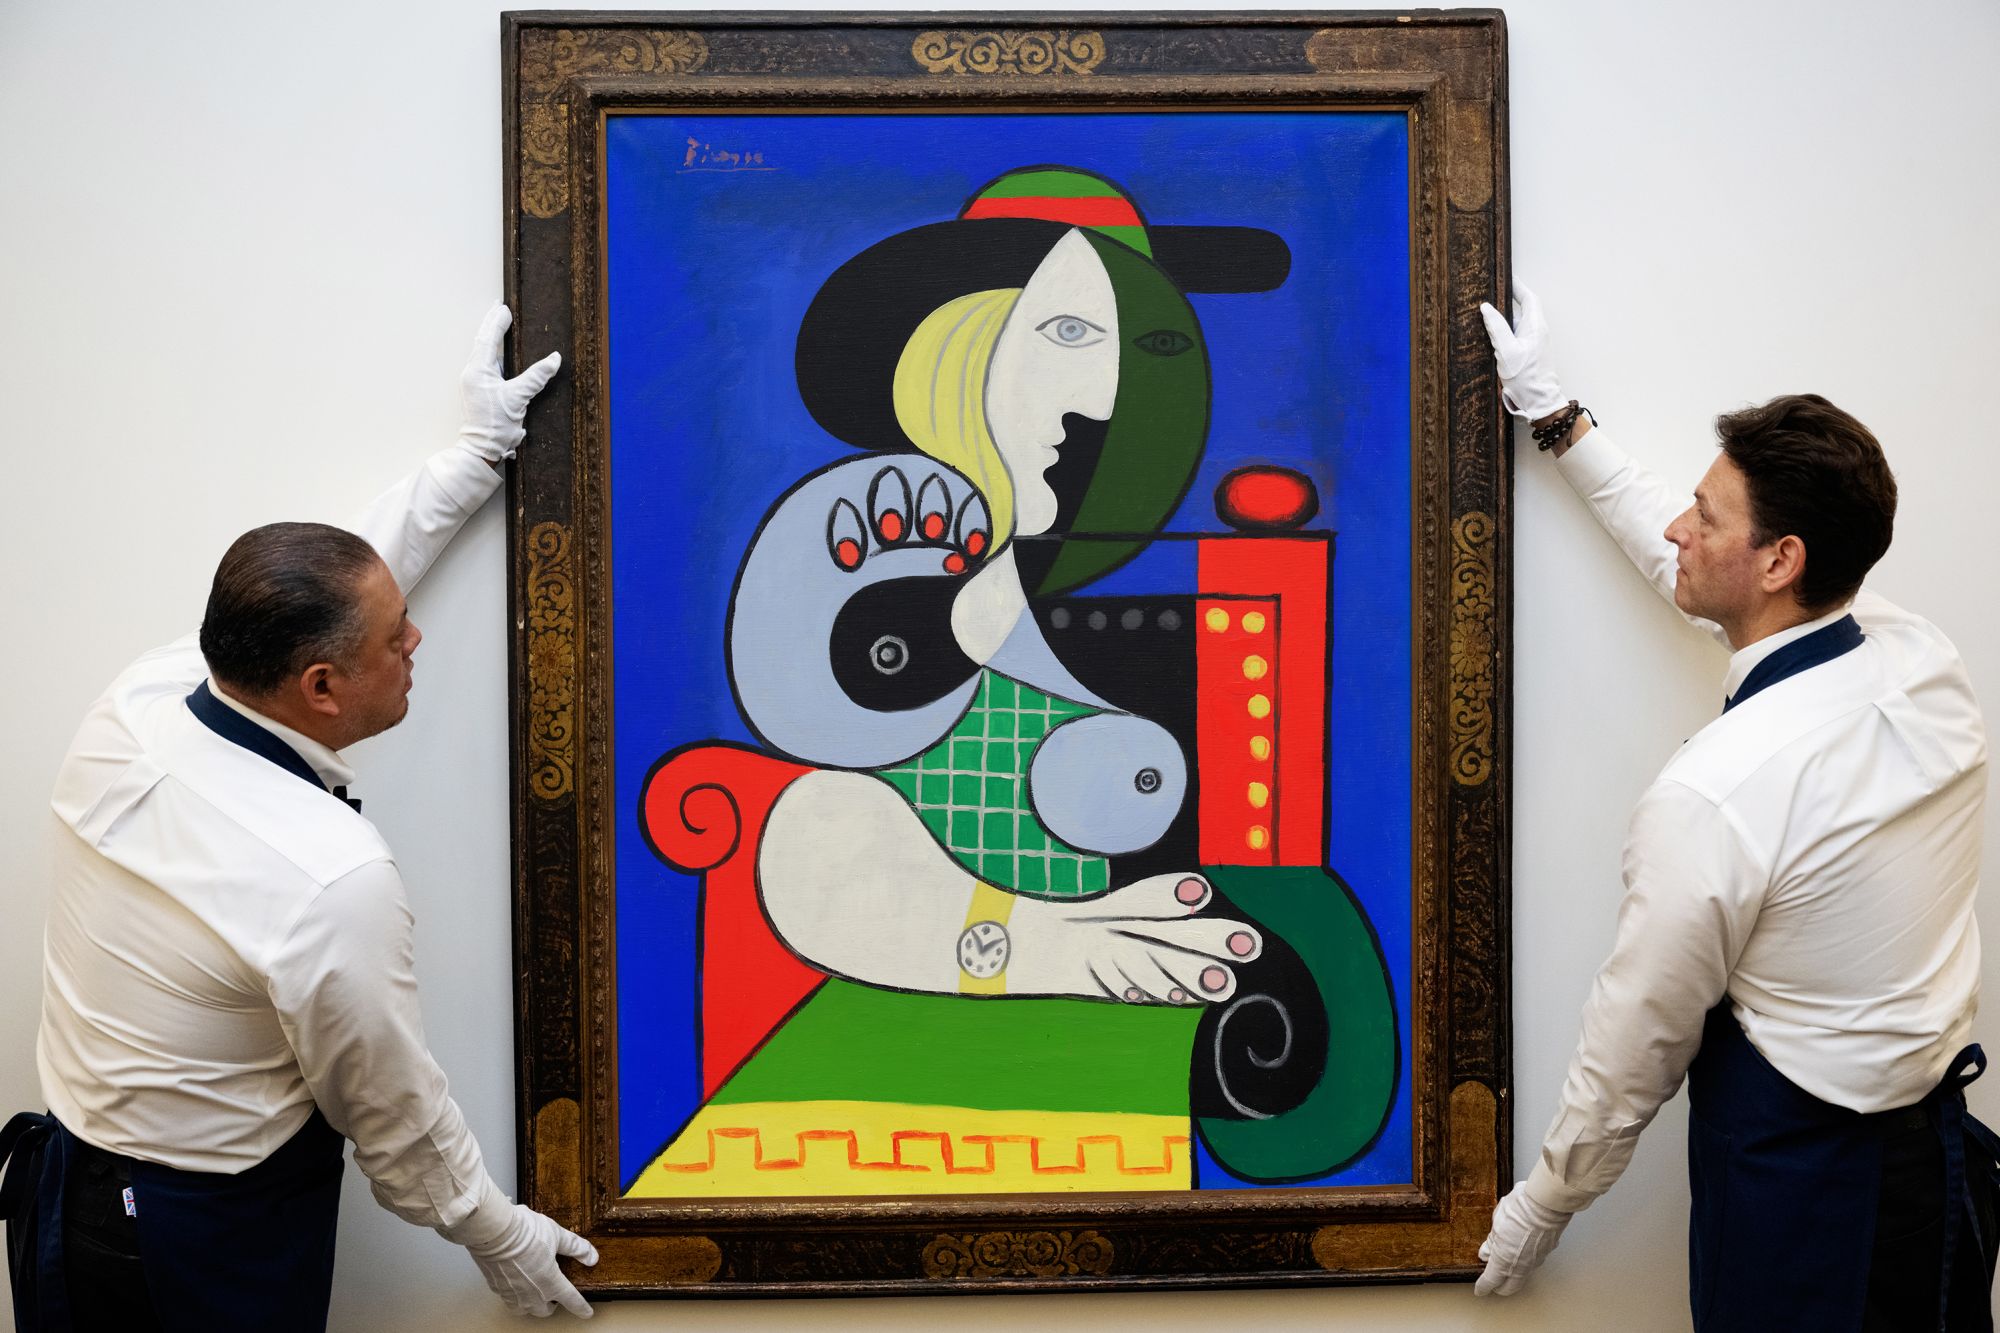 Pablo Picasso's “Femme à la montre” on display at Sotheby's ahead of the sale.